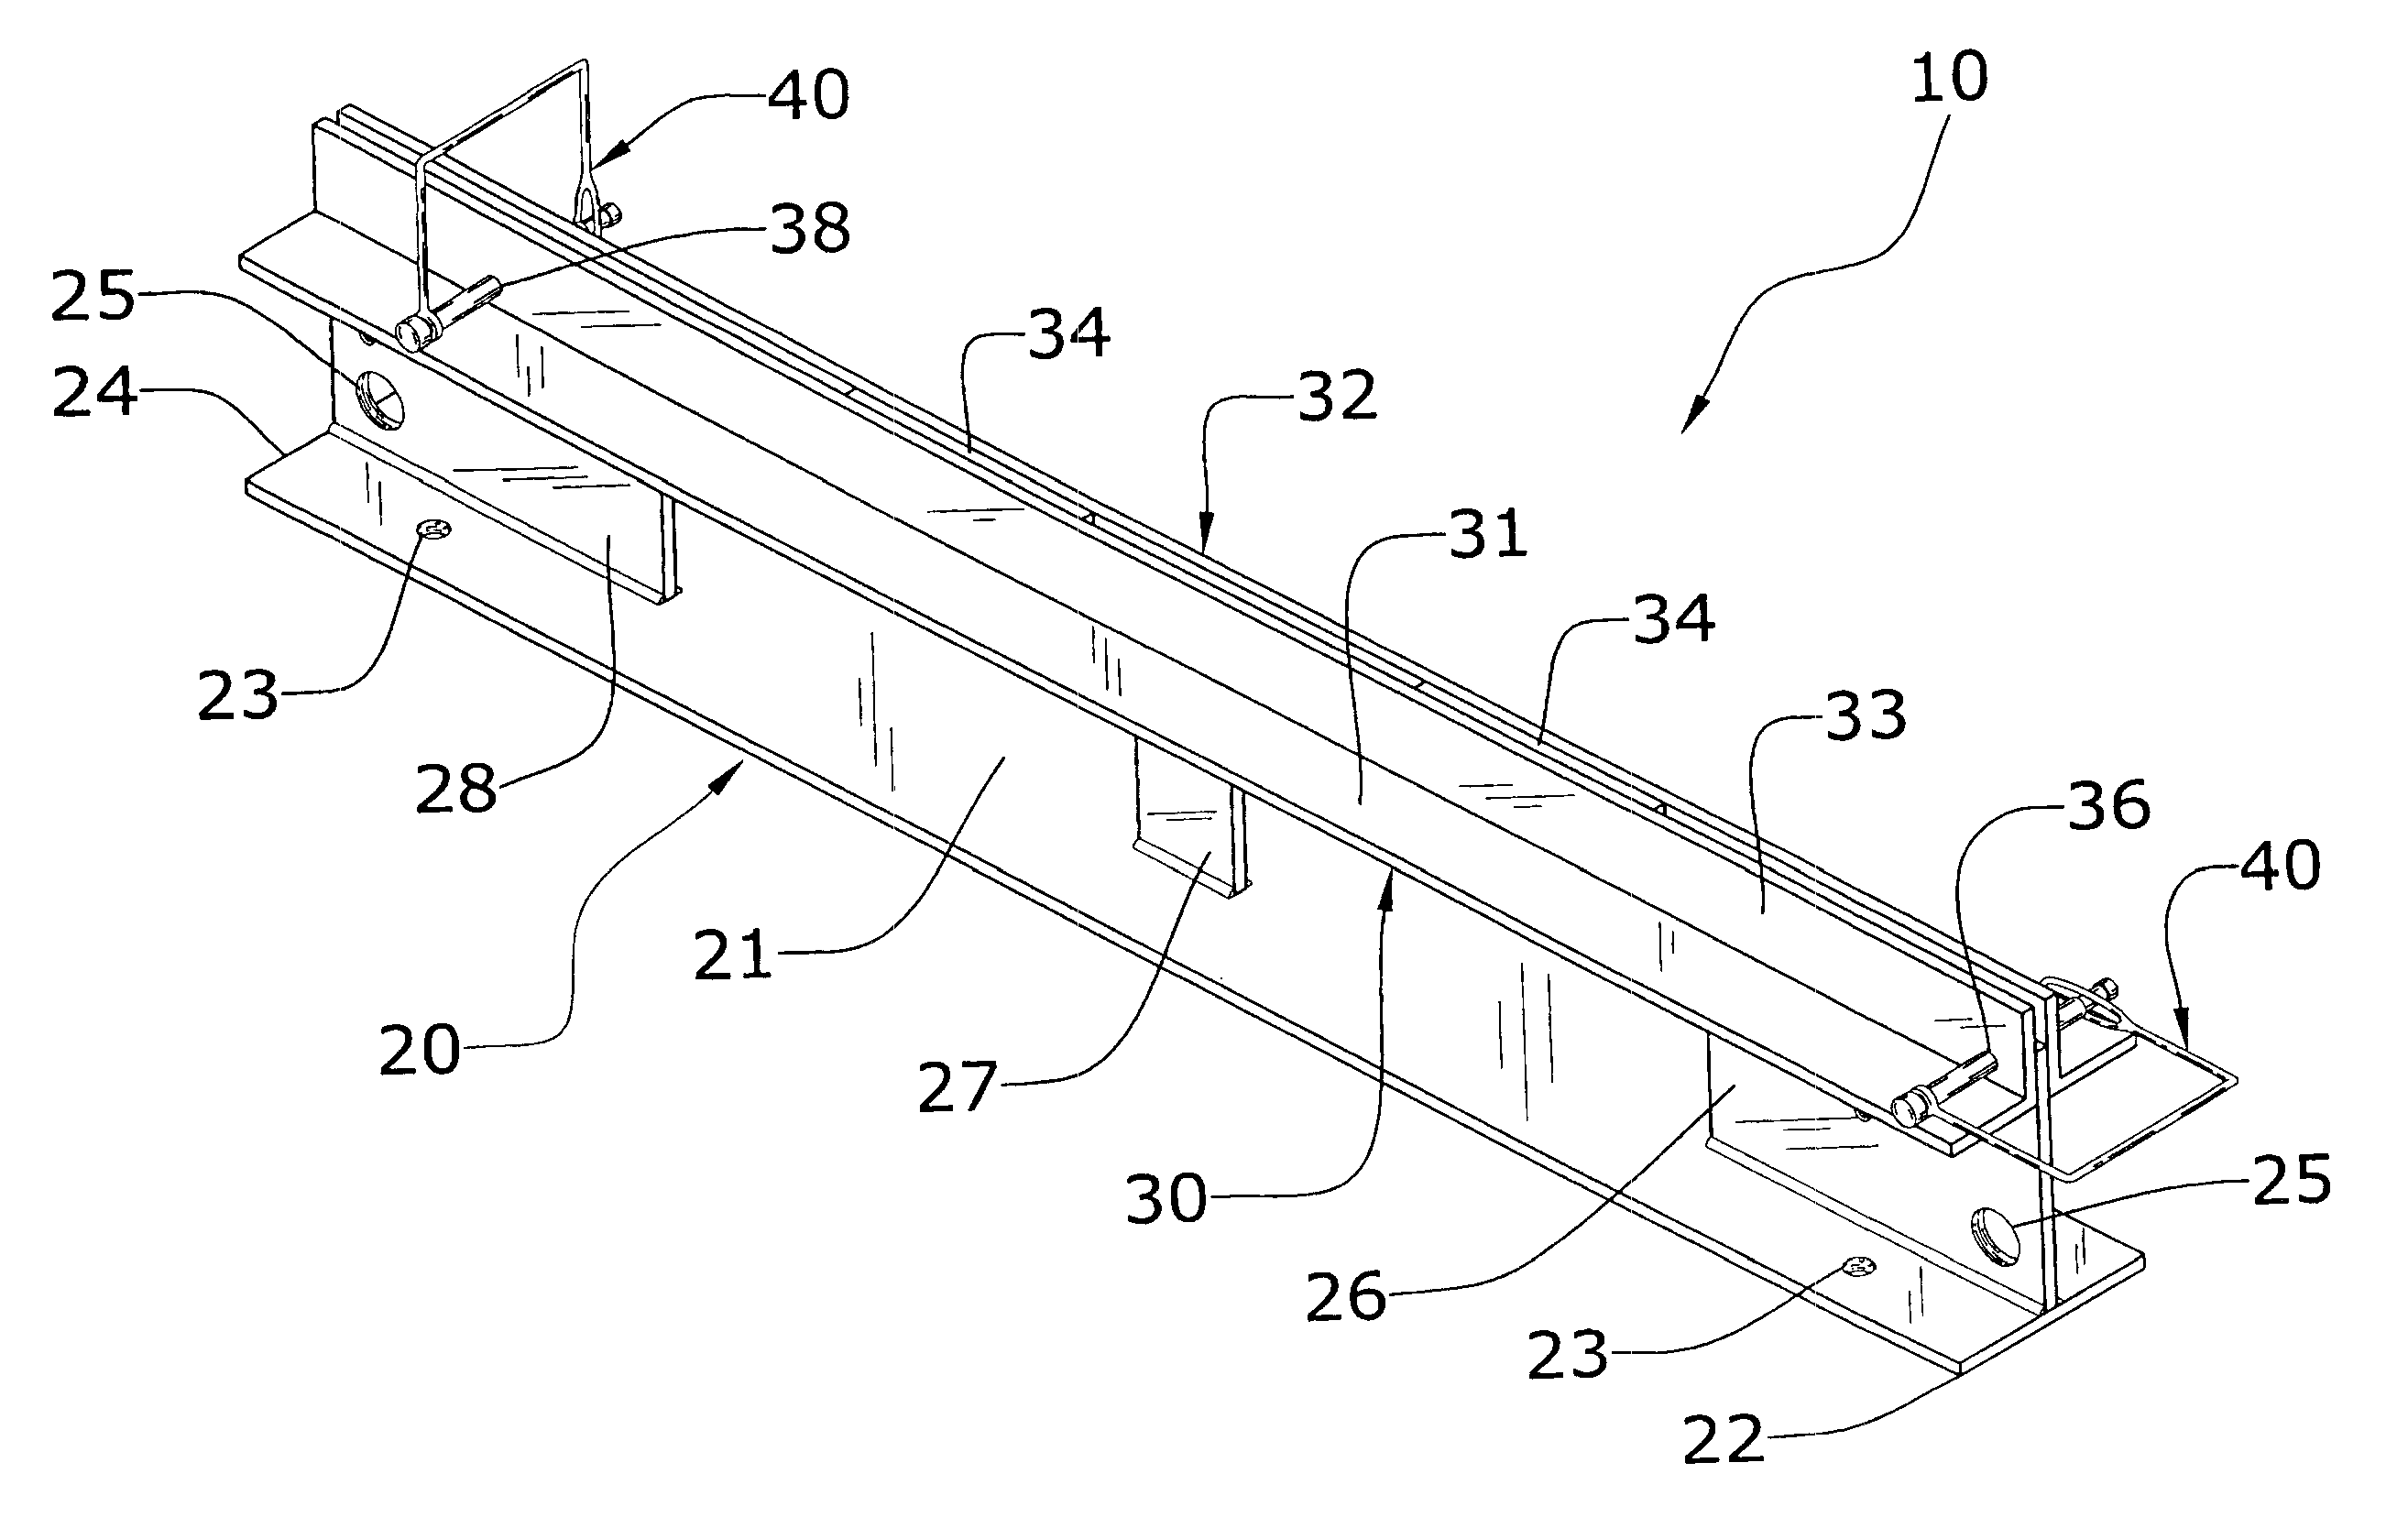 Fire hose safety anchor and method